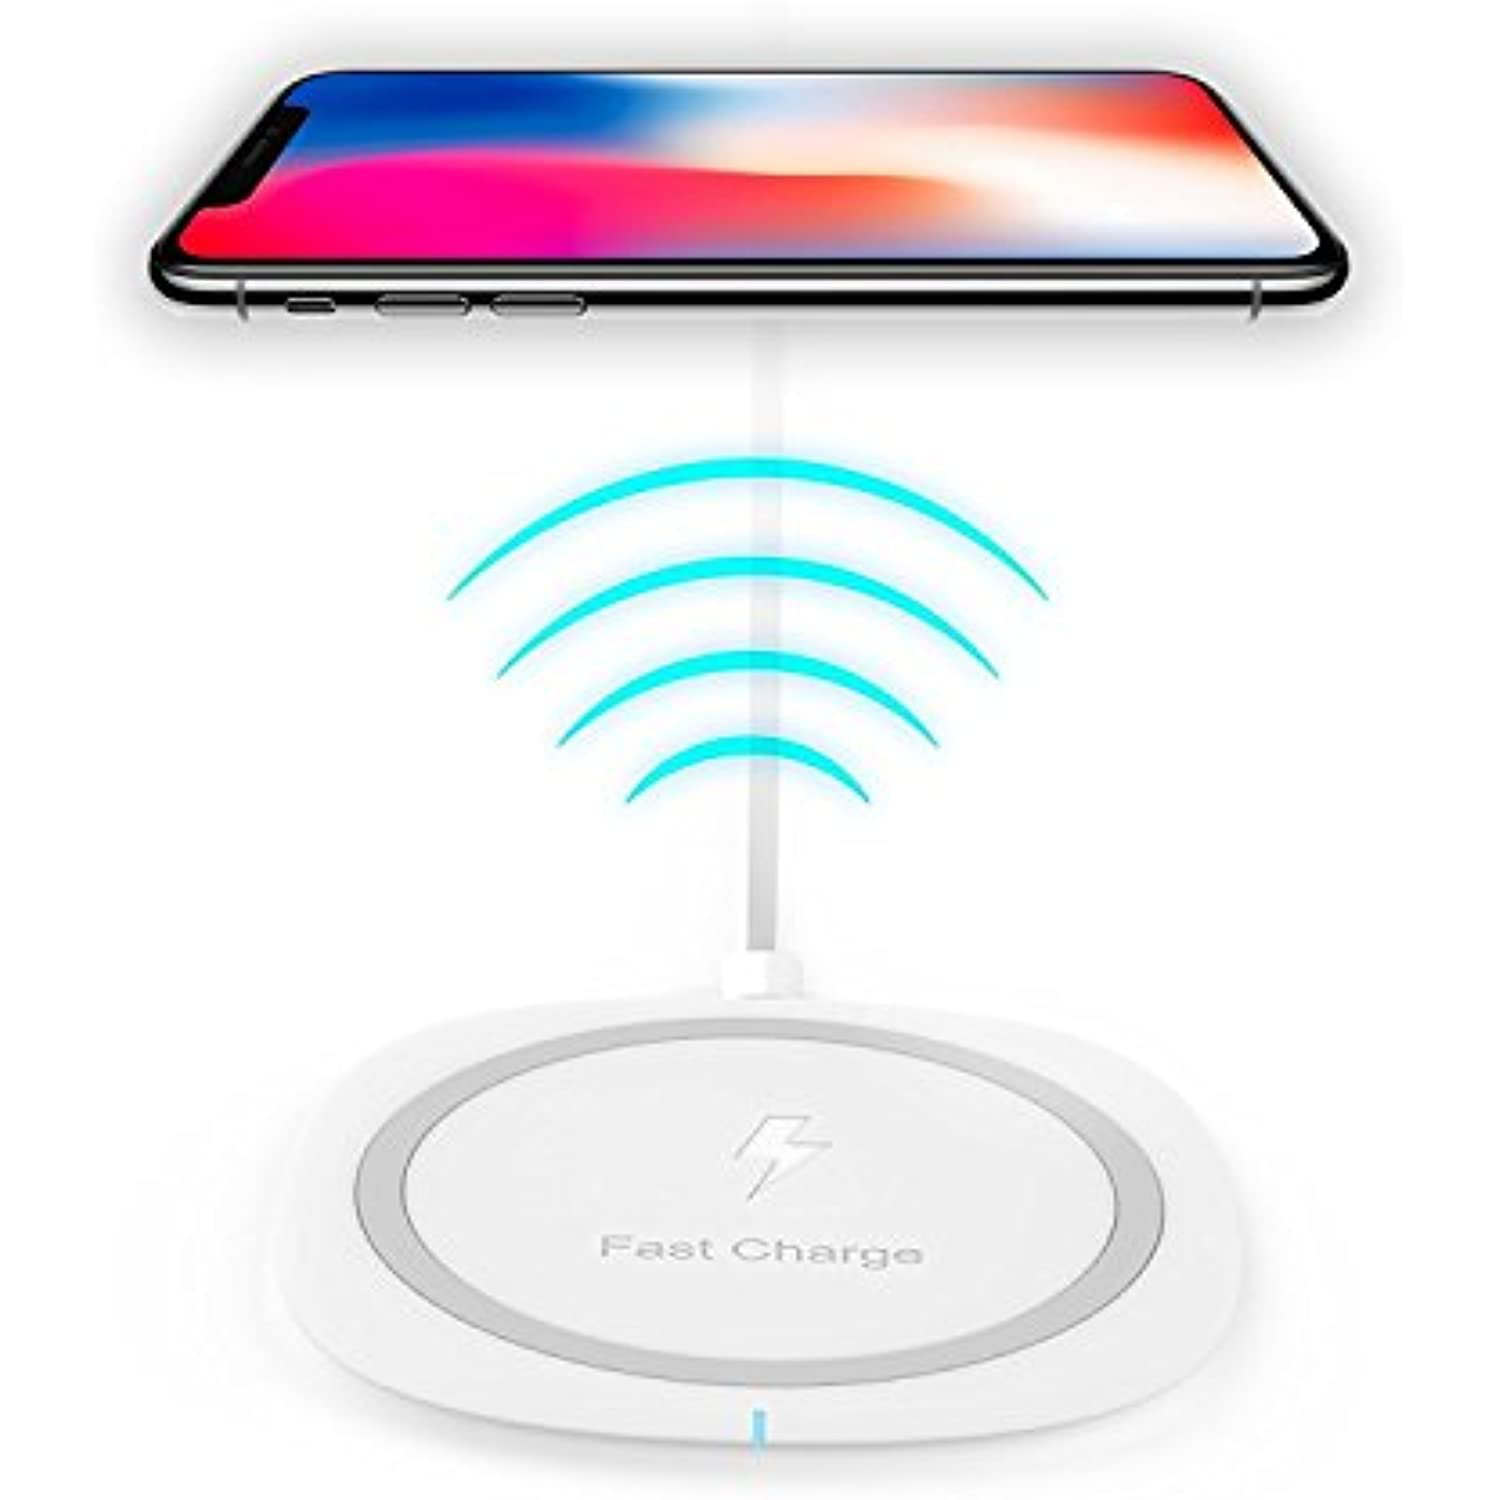 Fast Wireless Charger For Samsung Galaxy S7 Wireless Quick Charger Fast  Charge 10W for iPhone X, iPhone 8, iPhone 8 Plus,Samsung Note 8, S6 Edge +,  S7, S7 Edge, S8 and S8